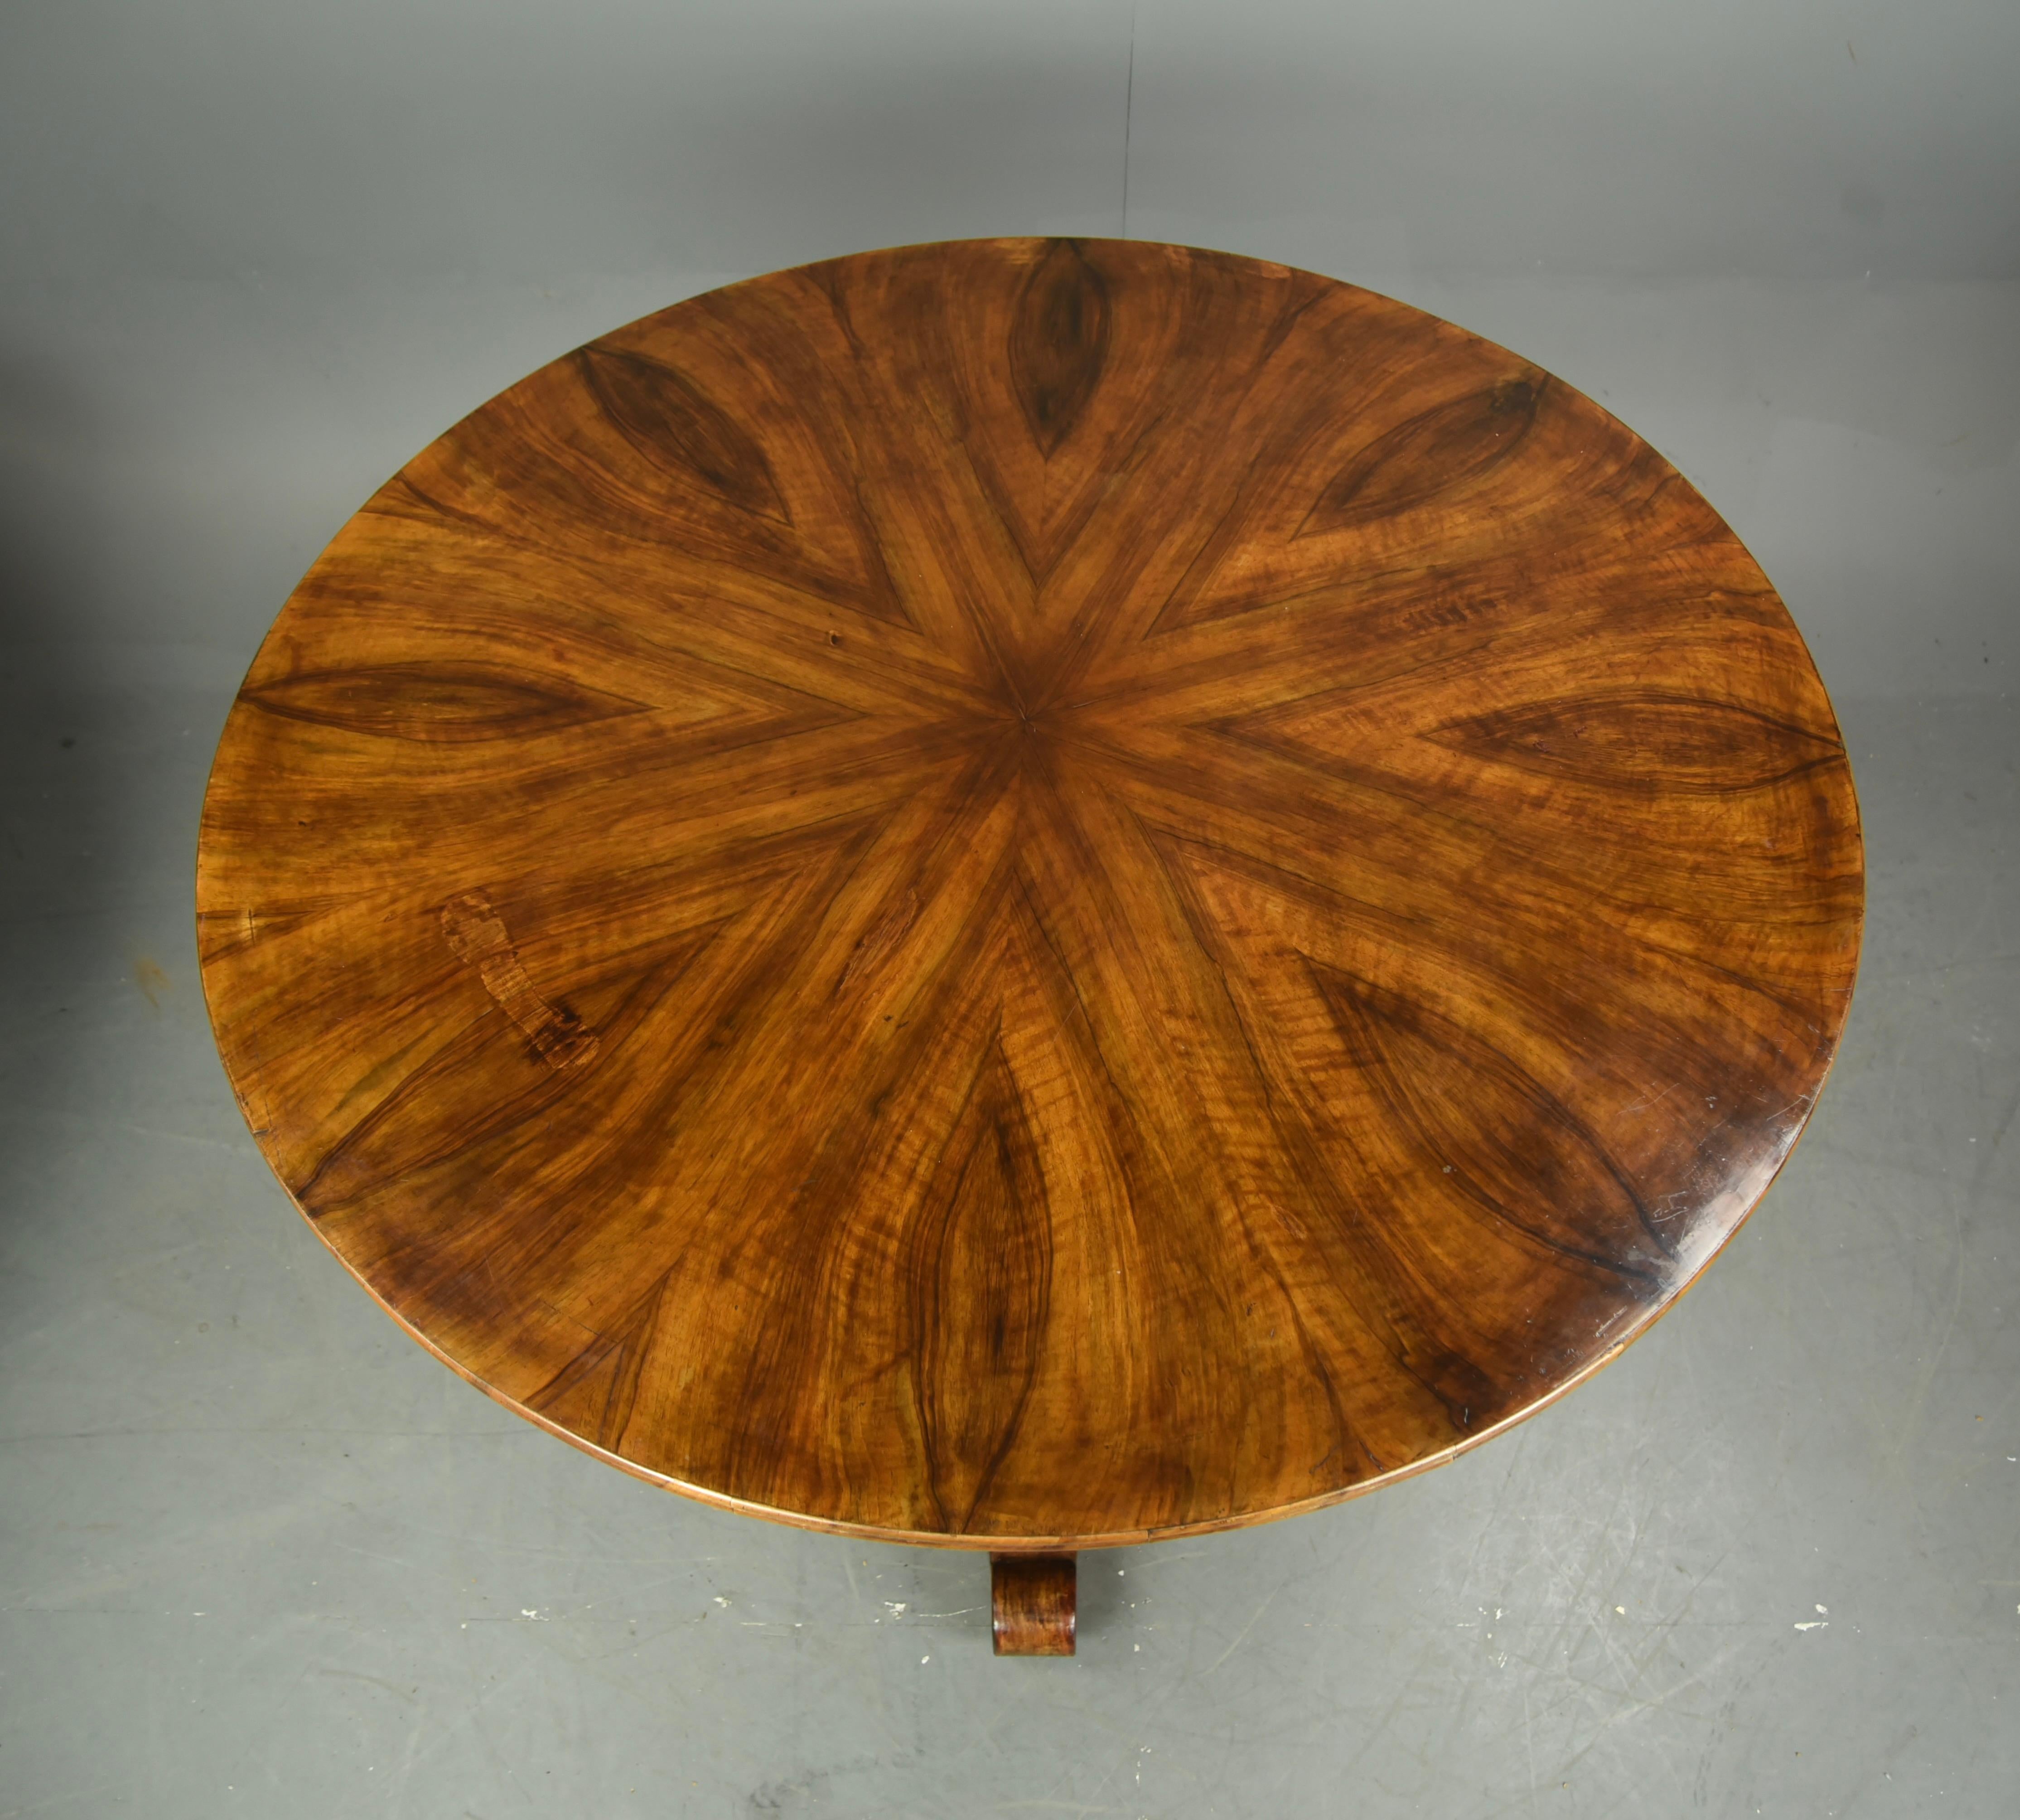 Fine quality Swedish radial veneered walnut centre / 6 seat dining table circa 1860.
The table has a fantastic grain and colour to the top with a bur walnut frieze ,standing on a very heavy triform base.
The table stands very solid with loose